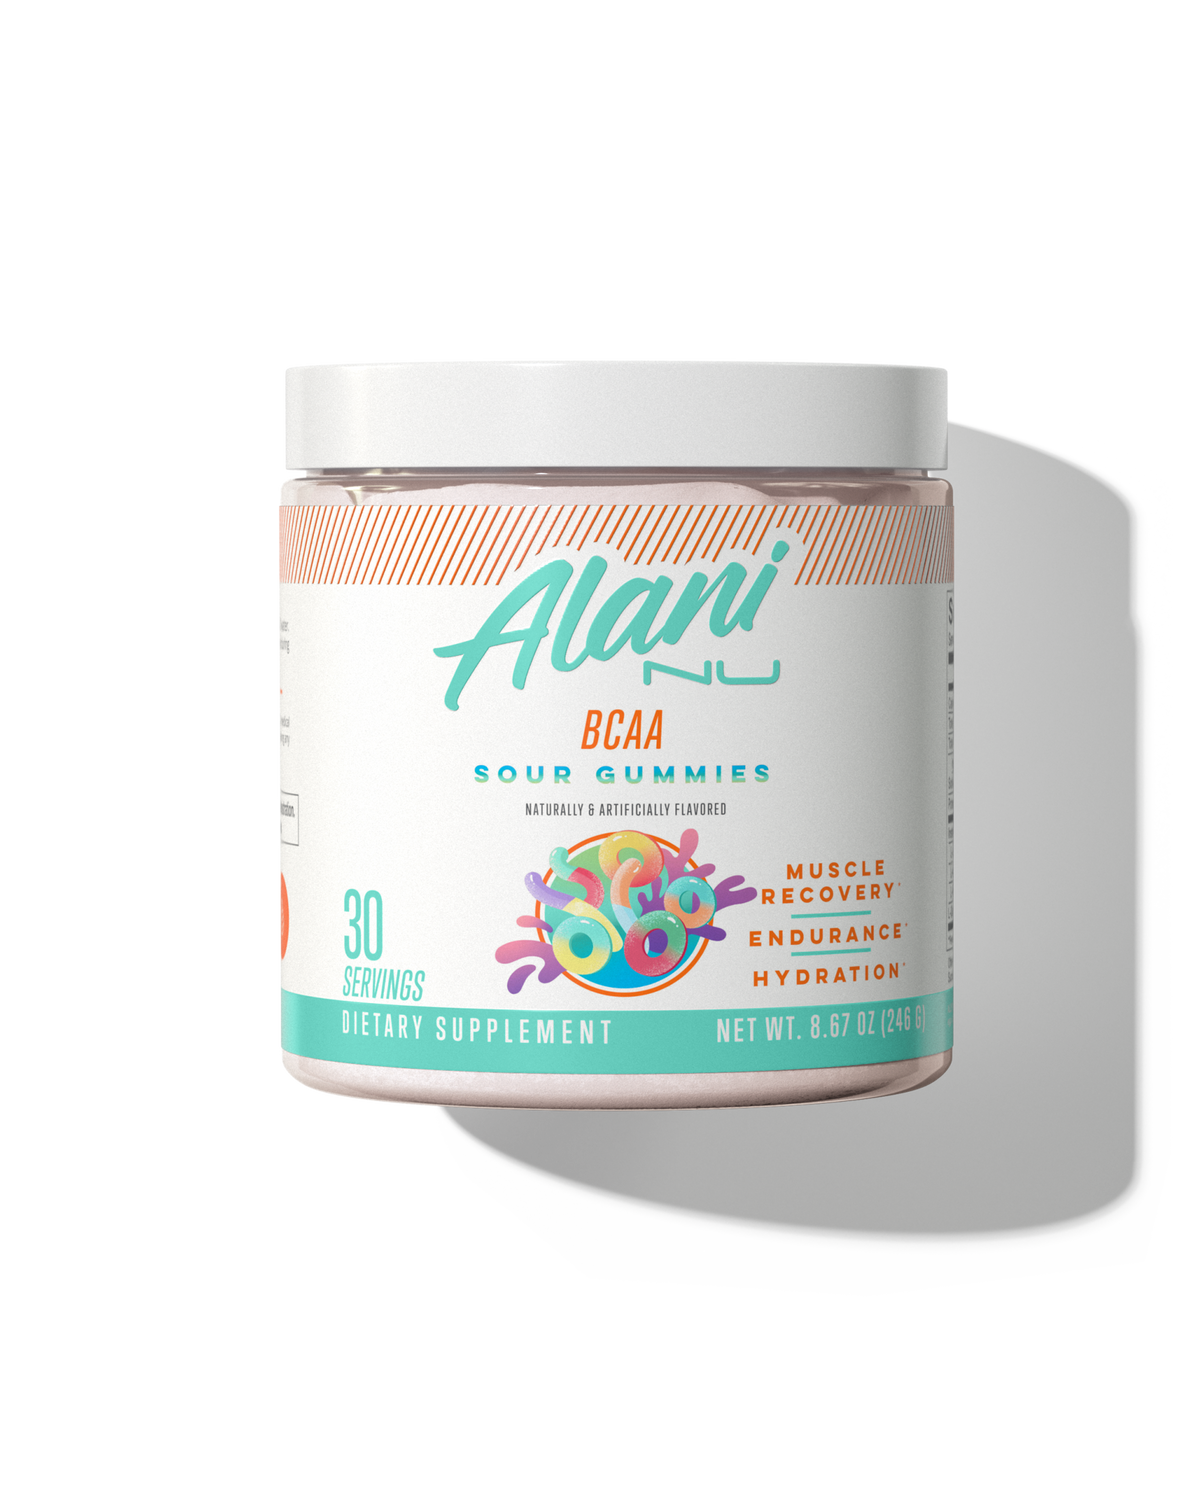 A 30 serving container of BCAA in Sour Gummies flavor.